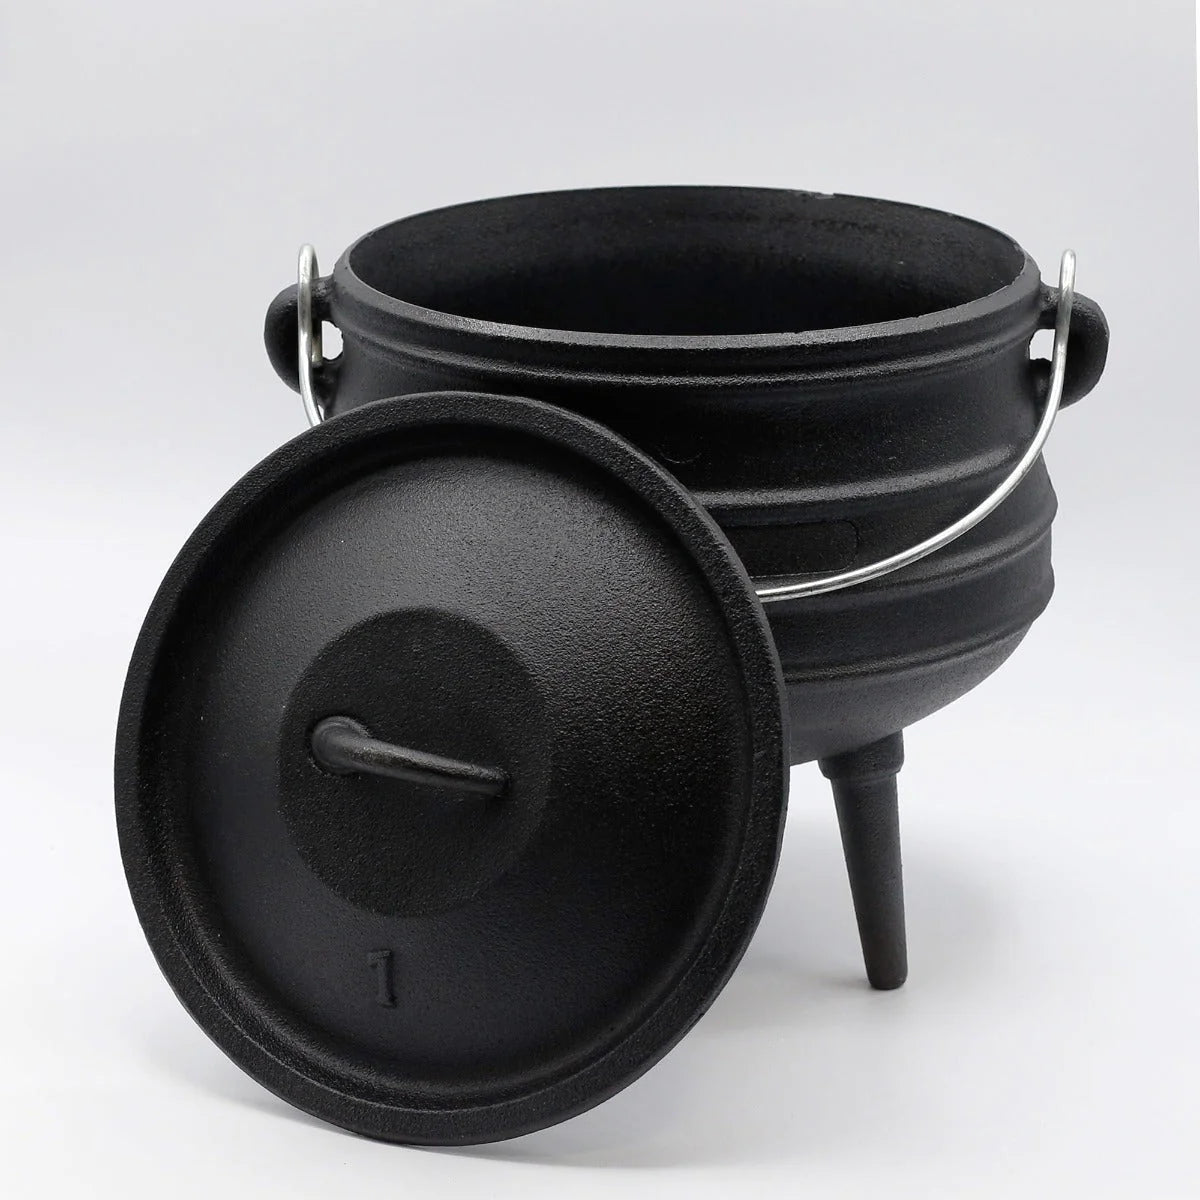 Traditional Potjie Pots  Witchcraft Ritual Supplies